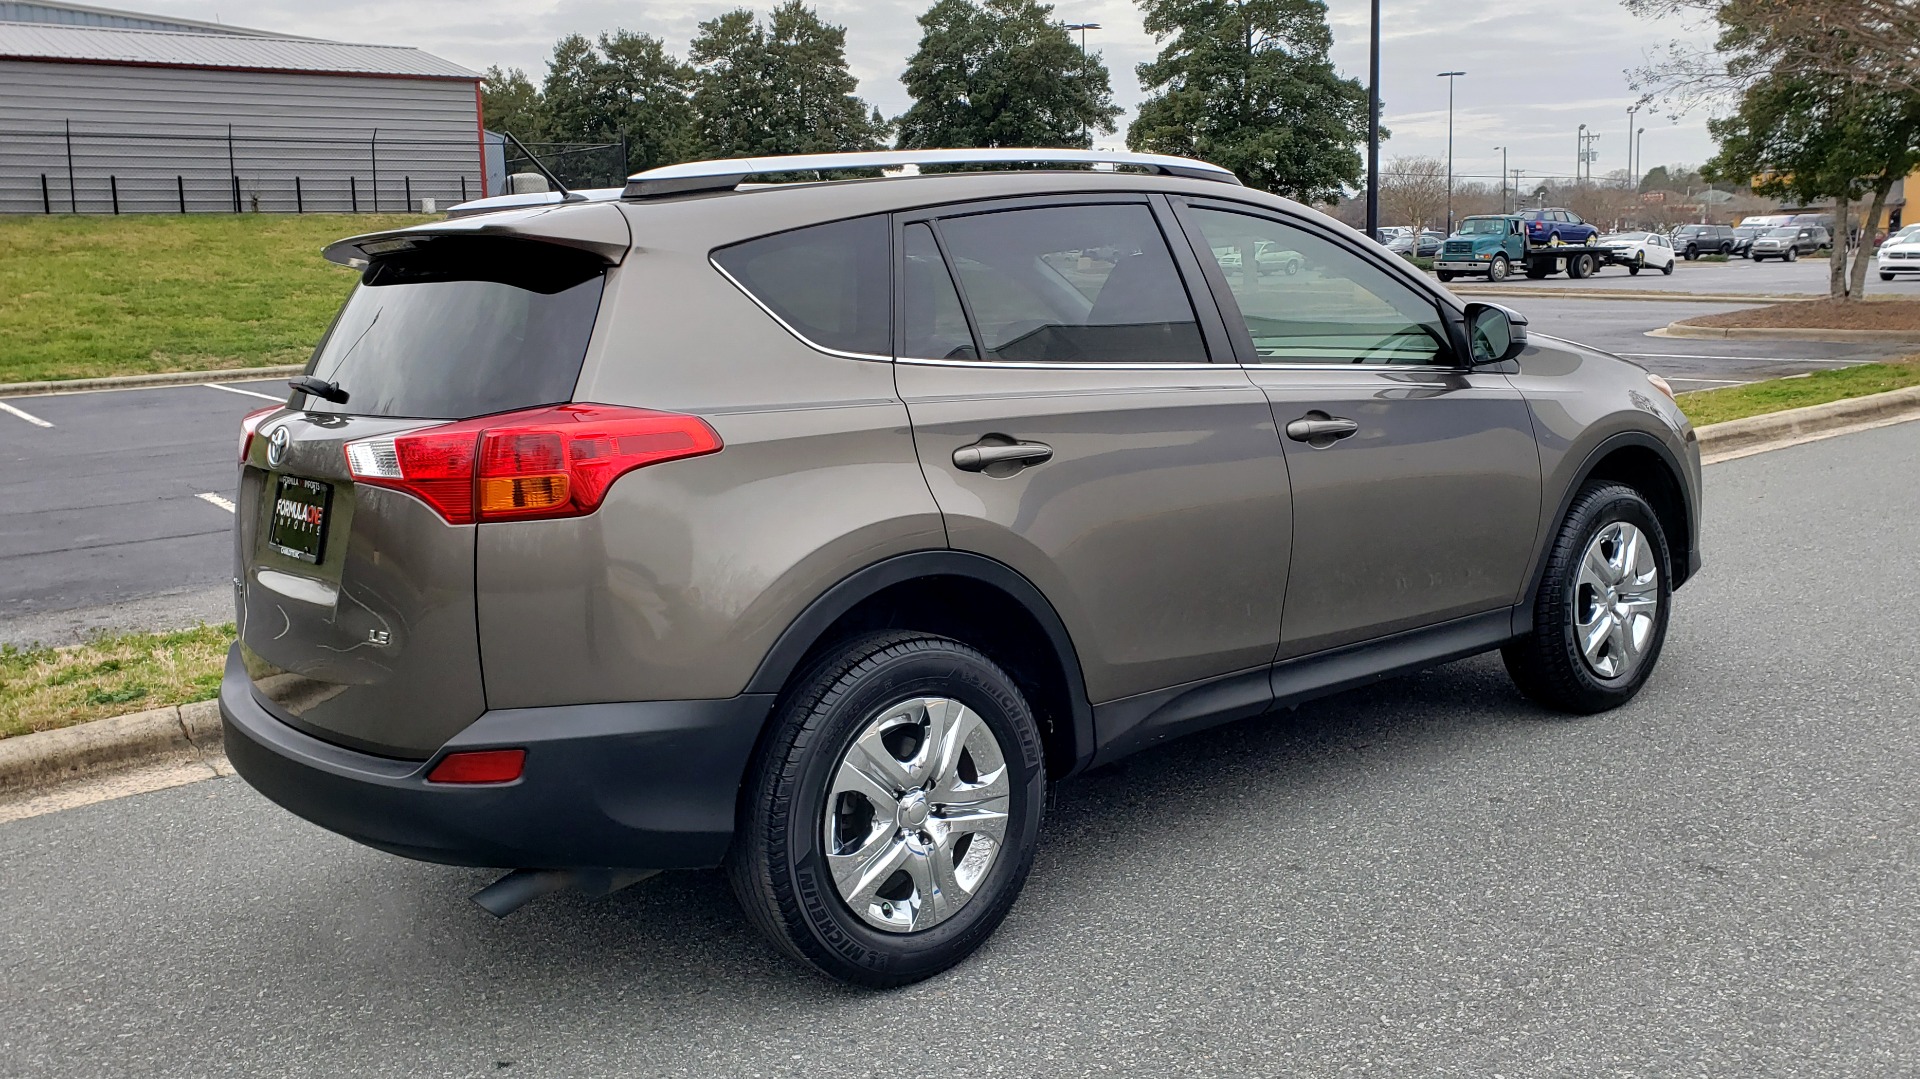 Used 2013 Toyota RAV4 LE / AUTO / FWD / 29 MPG HWY / CLEAN CARFAX for sale Sold at Formula Imports in Charlotte NC 28227 6